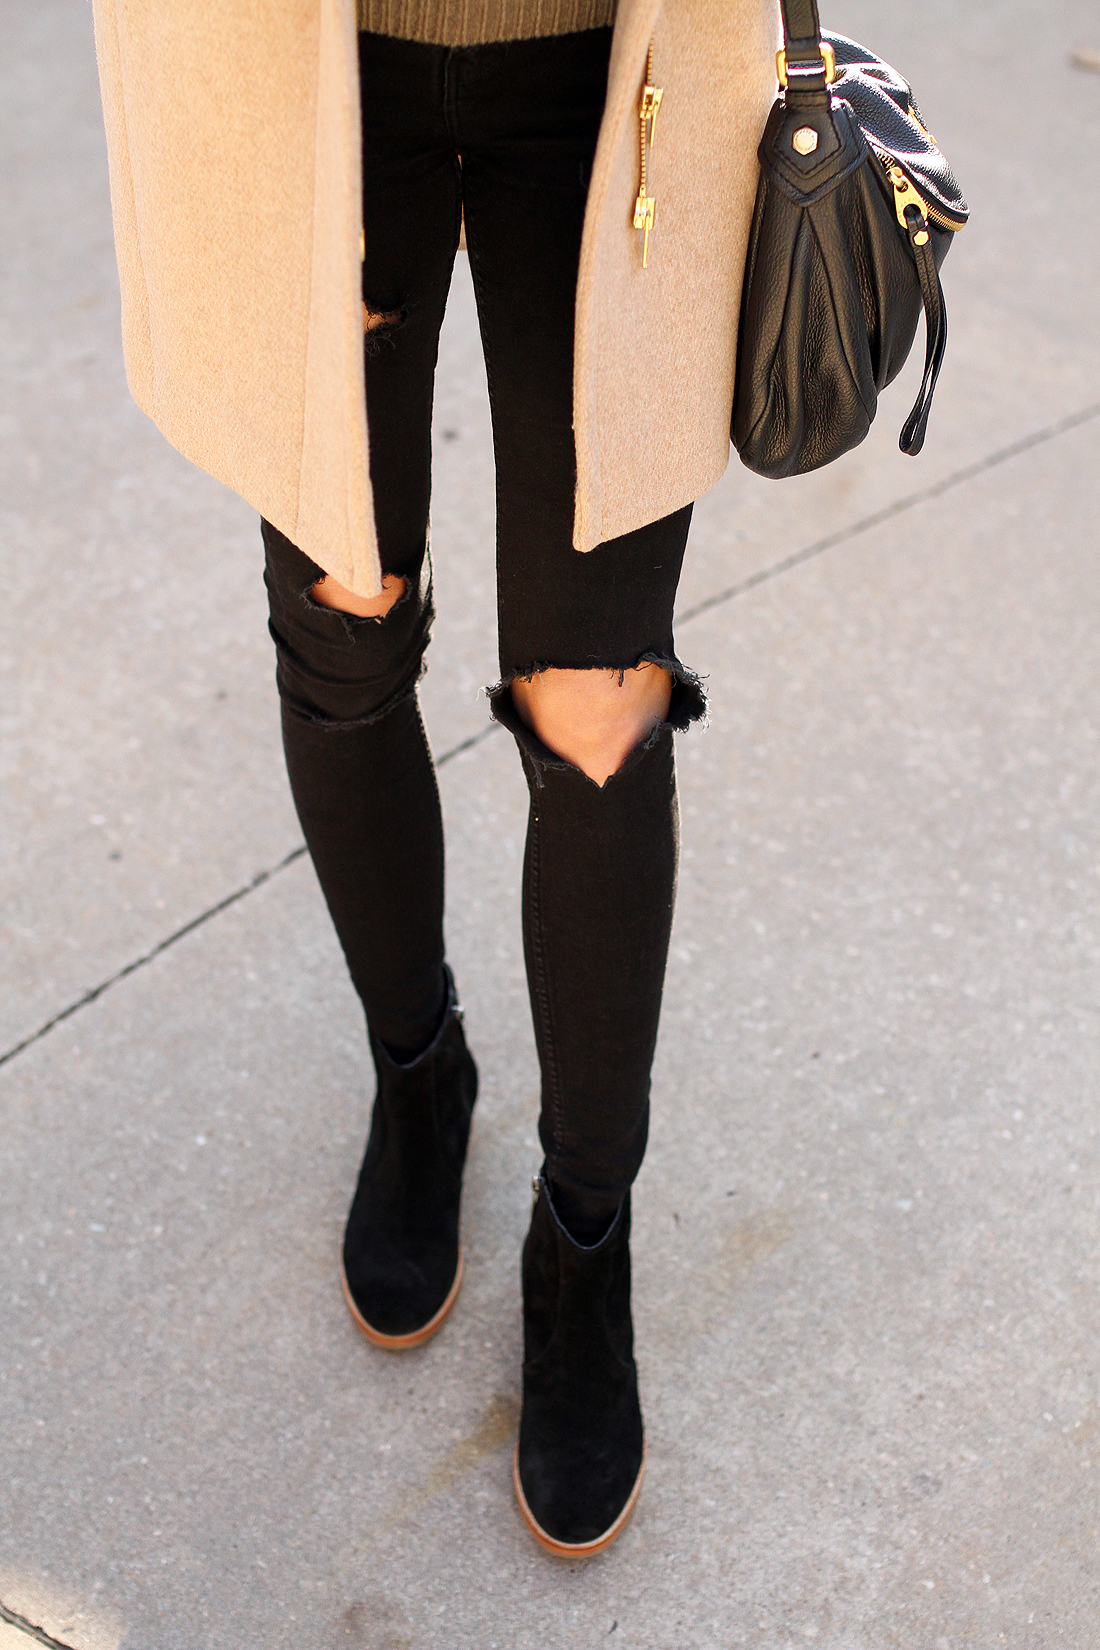 fahsion-jackson-black-ripped-skinny-jeans-black-ankle-booties